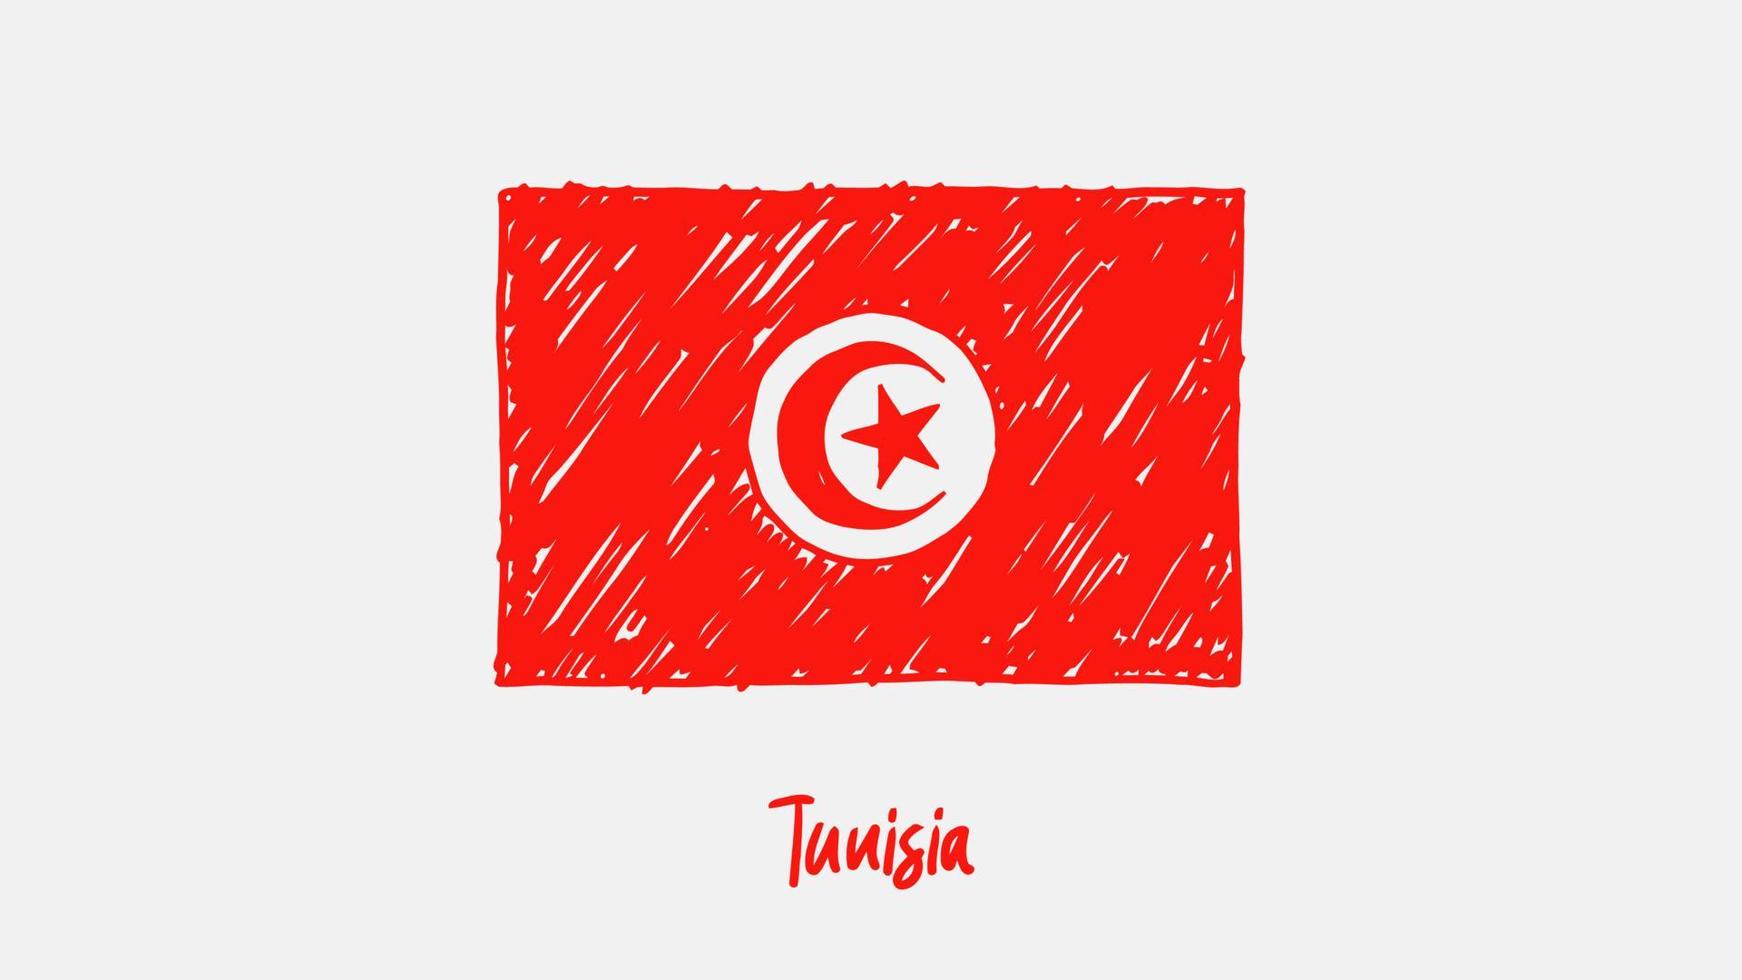 Tunisia National Country Flag Marker or Pencil Sketch Illustration Vector